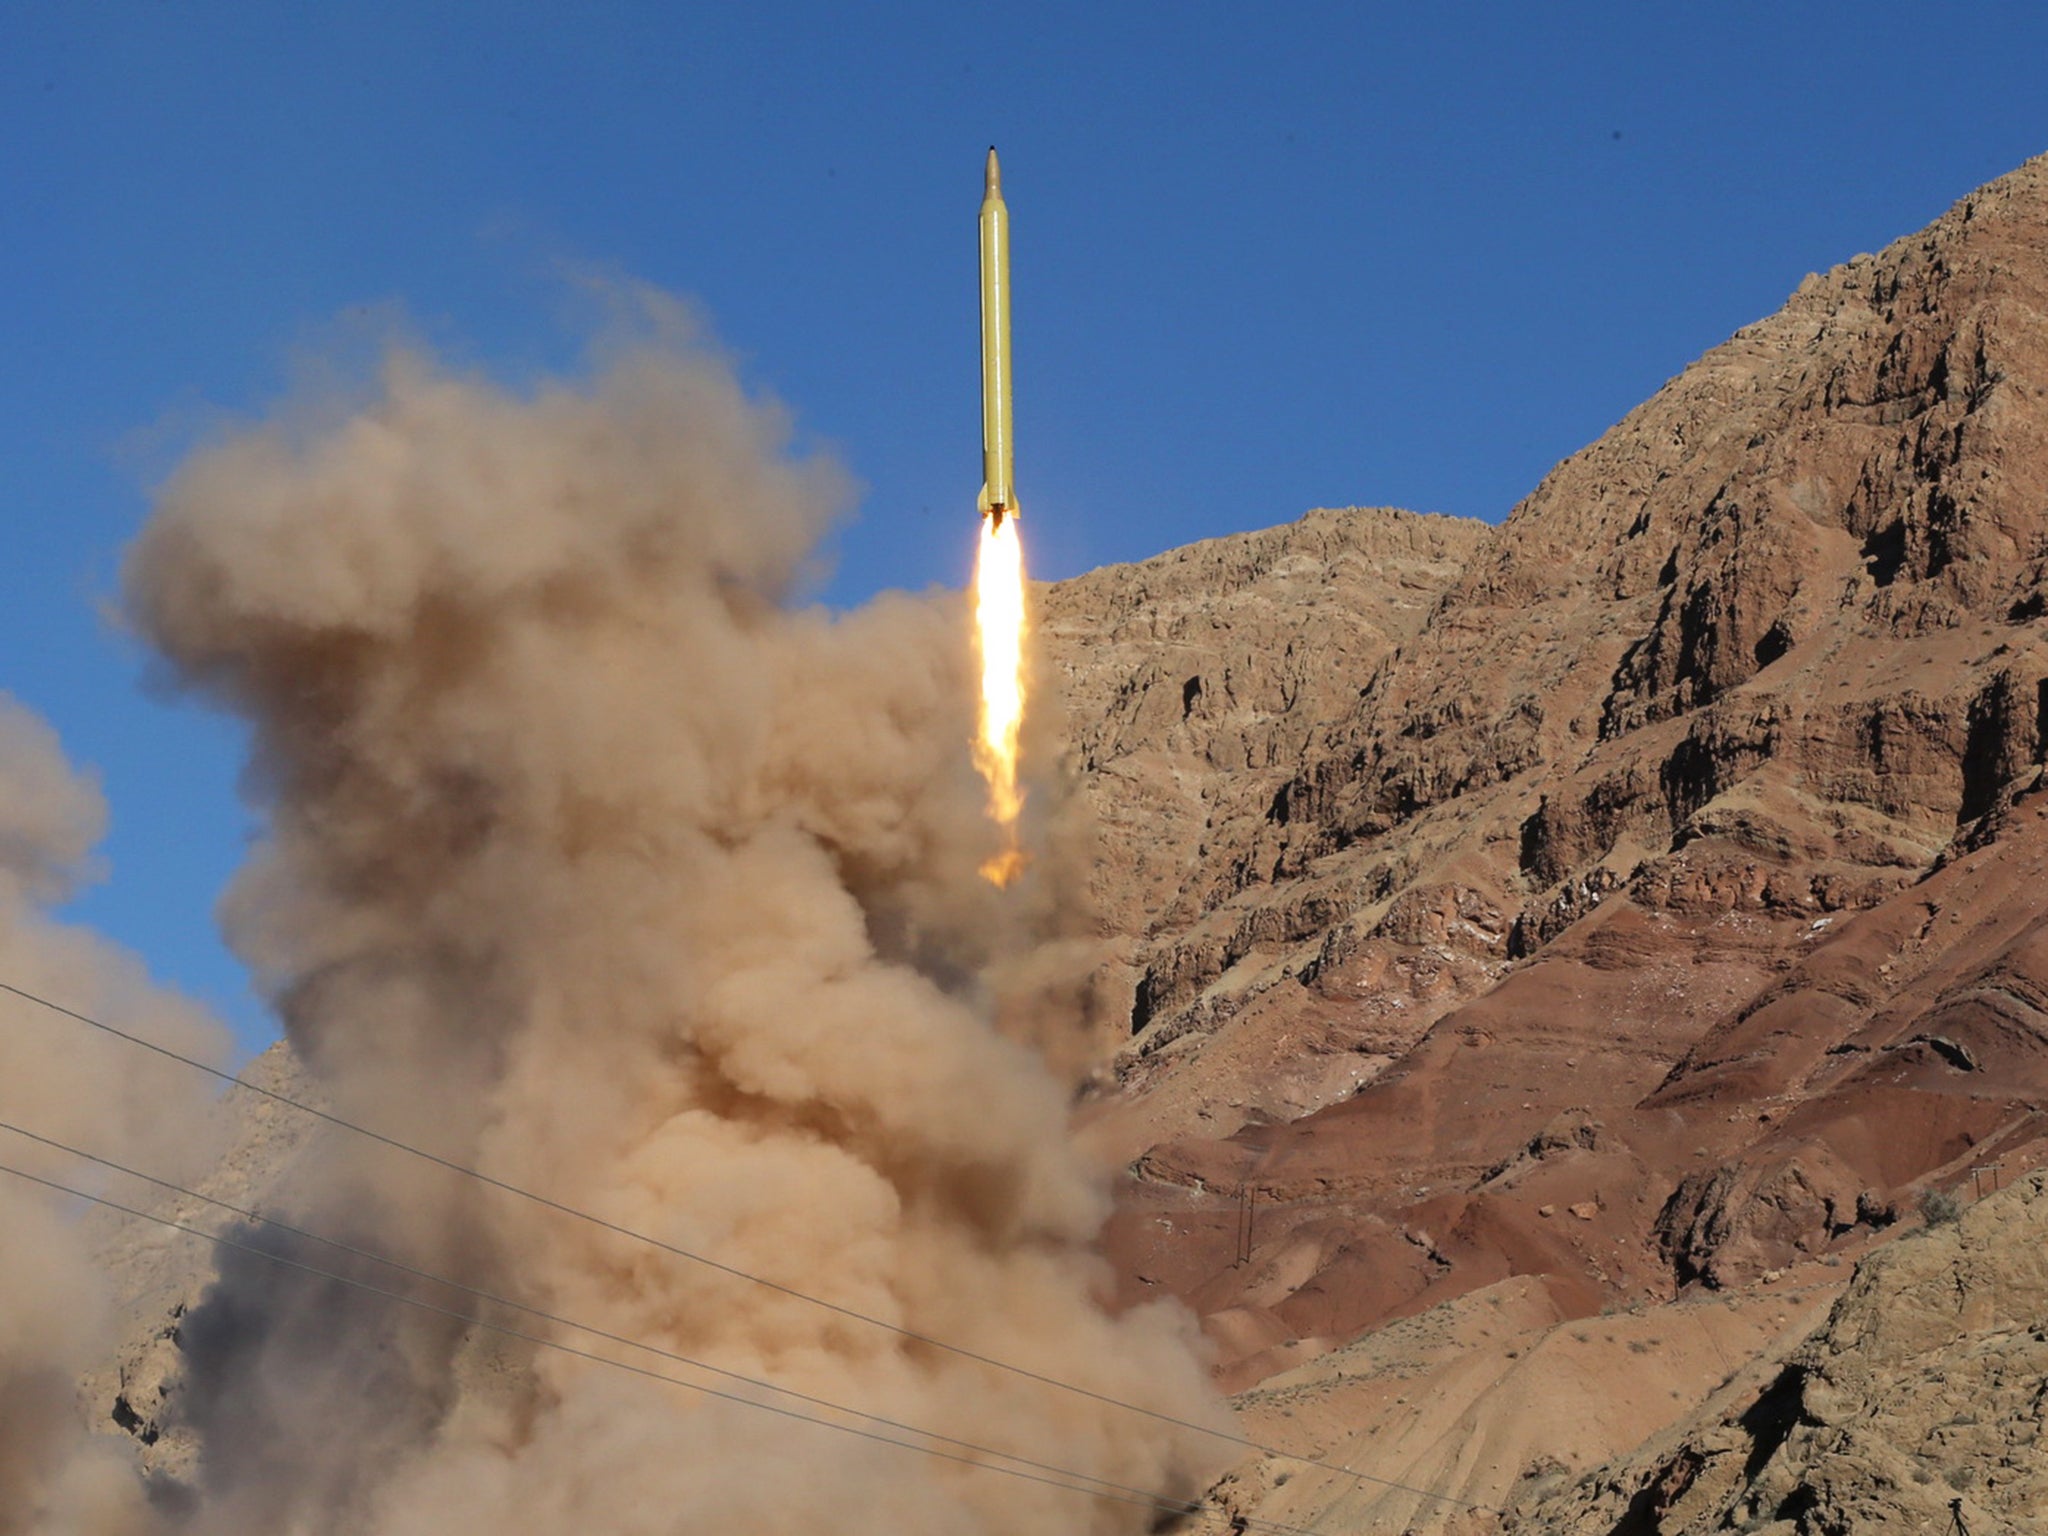 A long-range ballistic missile launched in Iran in March 2016